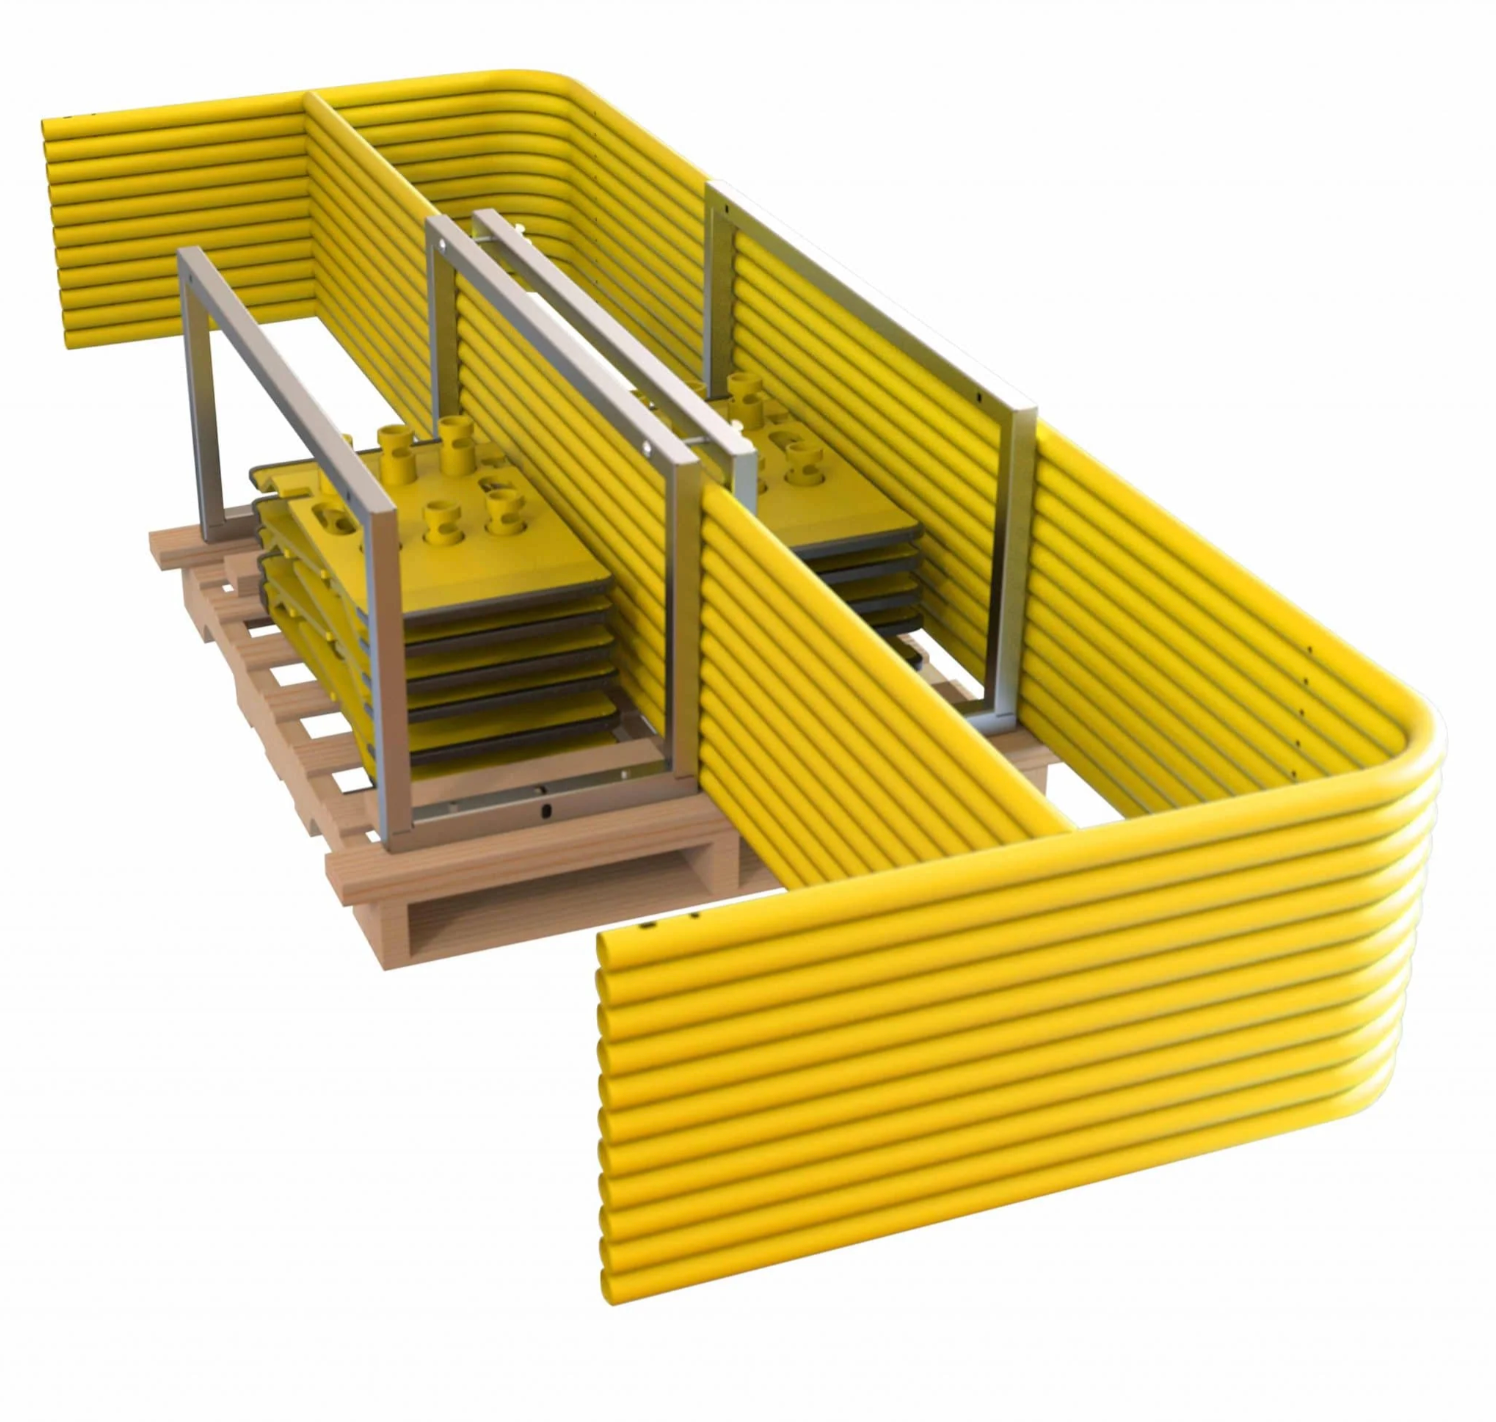 Tiedown Guardrail System - Yellow 10' Rail and Base Kit (11 RZ Rails, 12 Zip Bases)